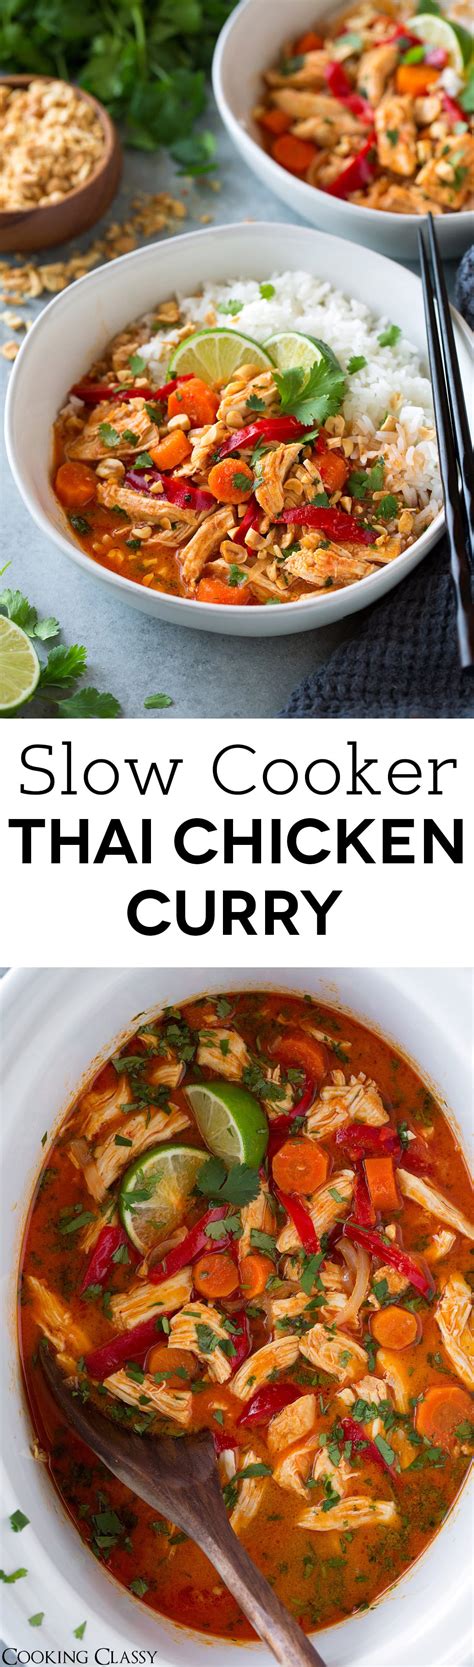 thai-chicken-curry-slow-cooker-or-instant-pot-cooking image